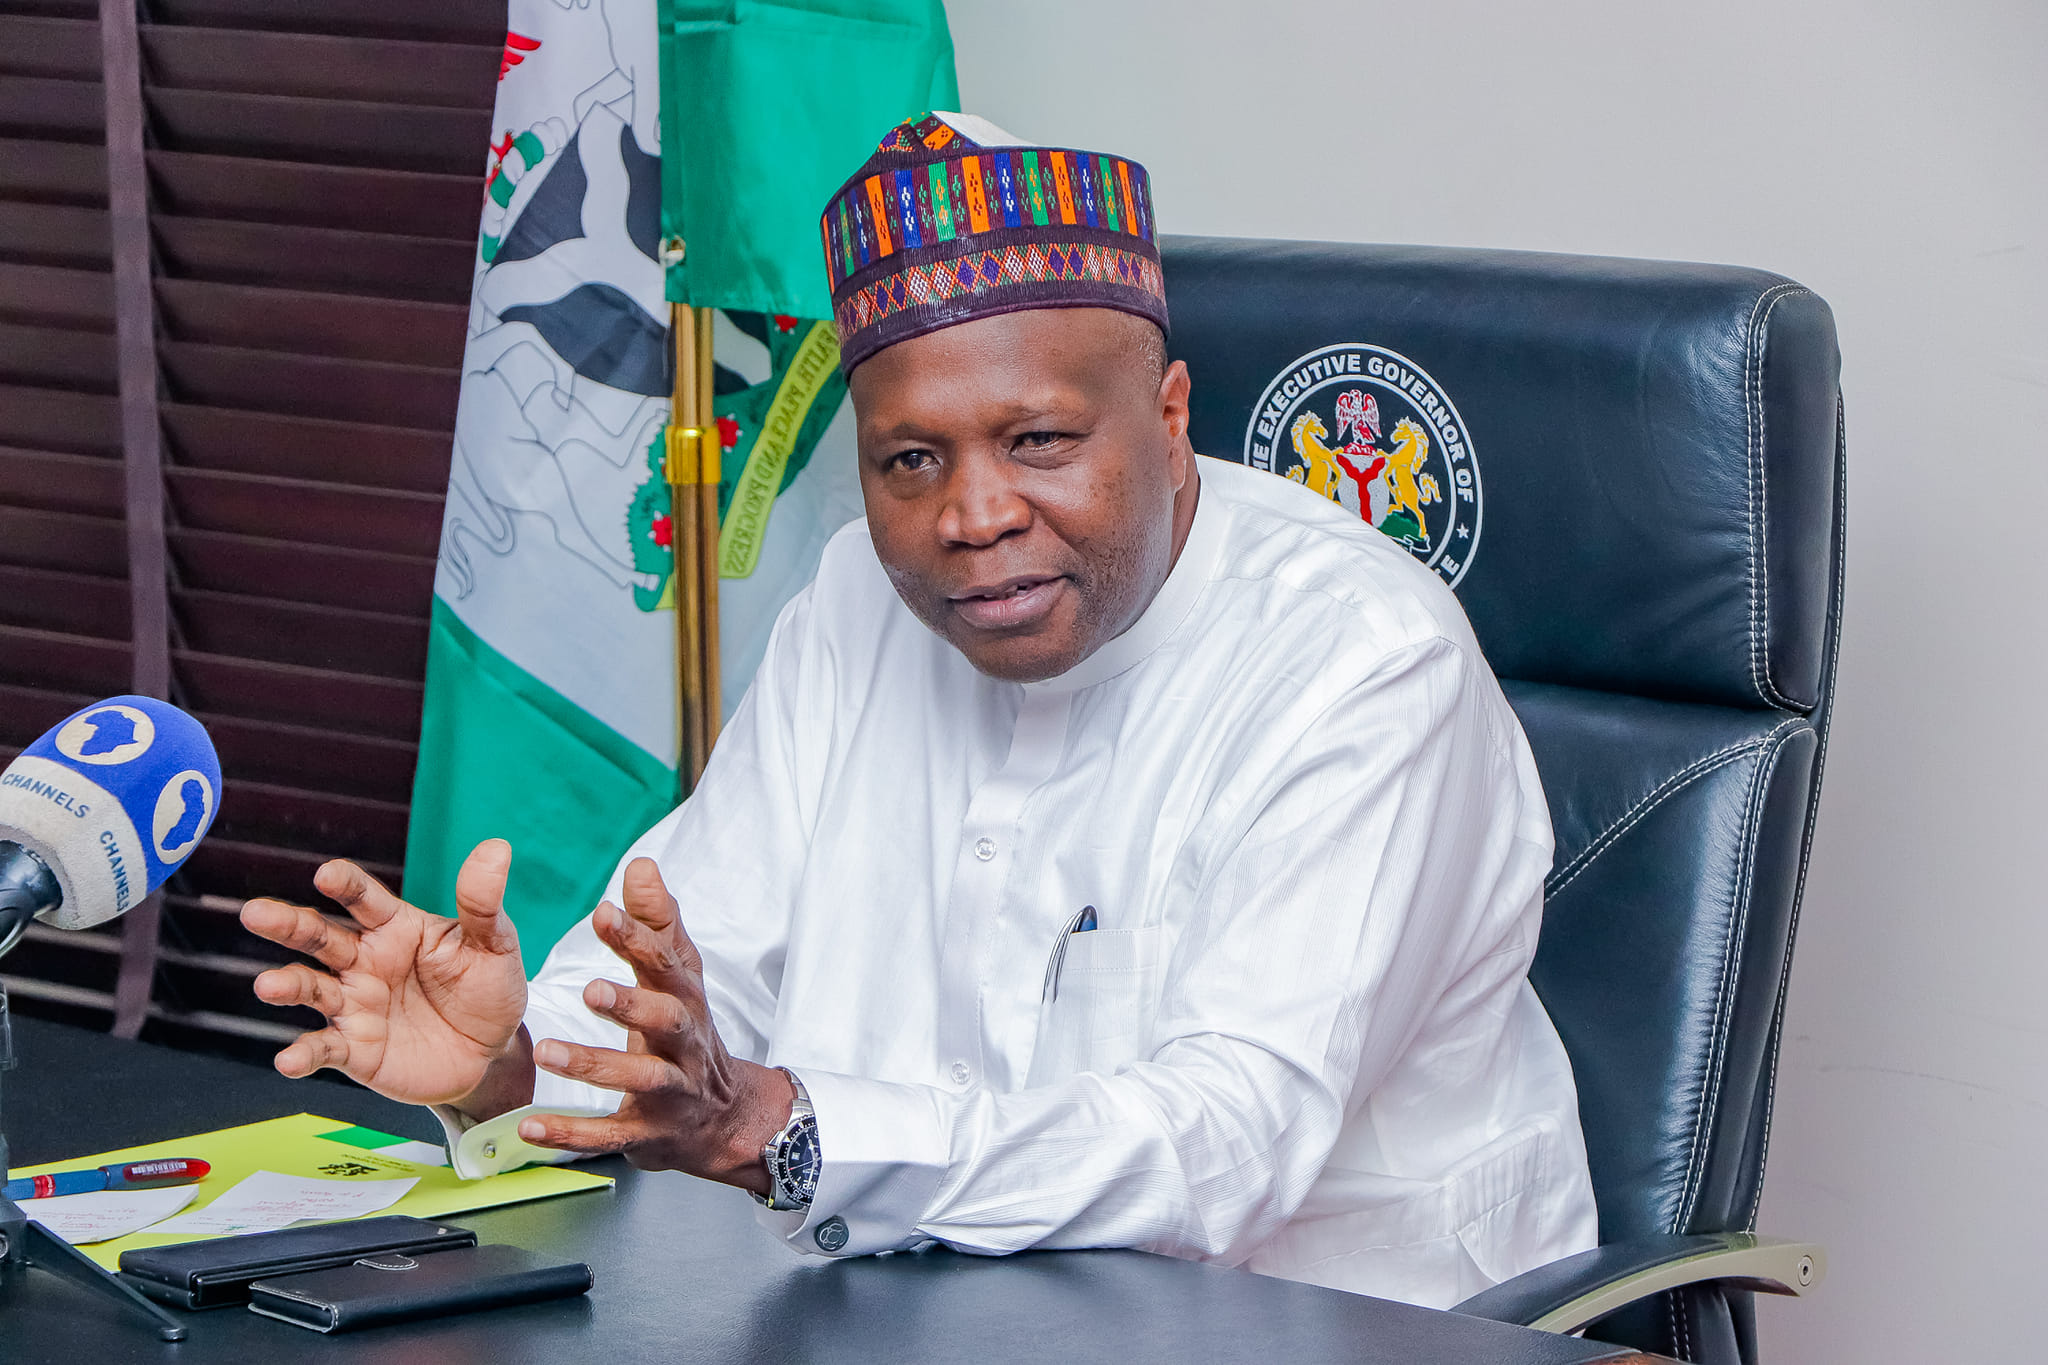 GoInvest 2022: Governor Inuwa Yahaya Mandates Steering Committee To Stage Successful Investment Summit